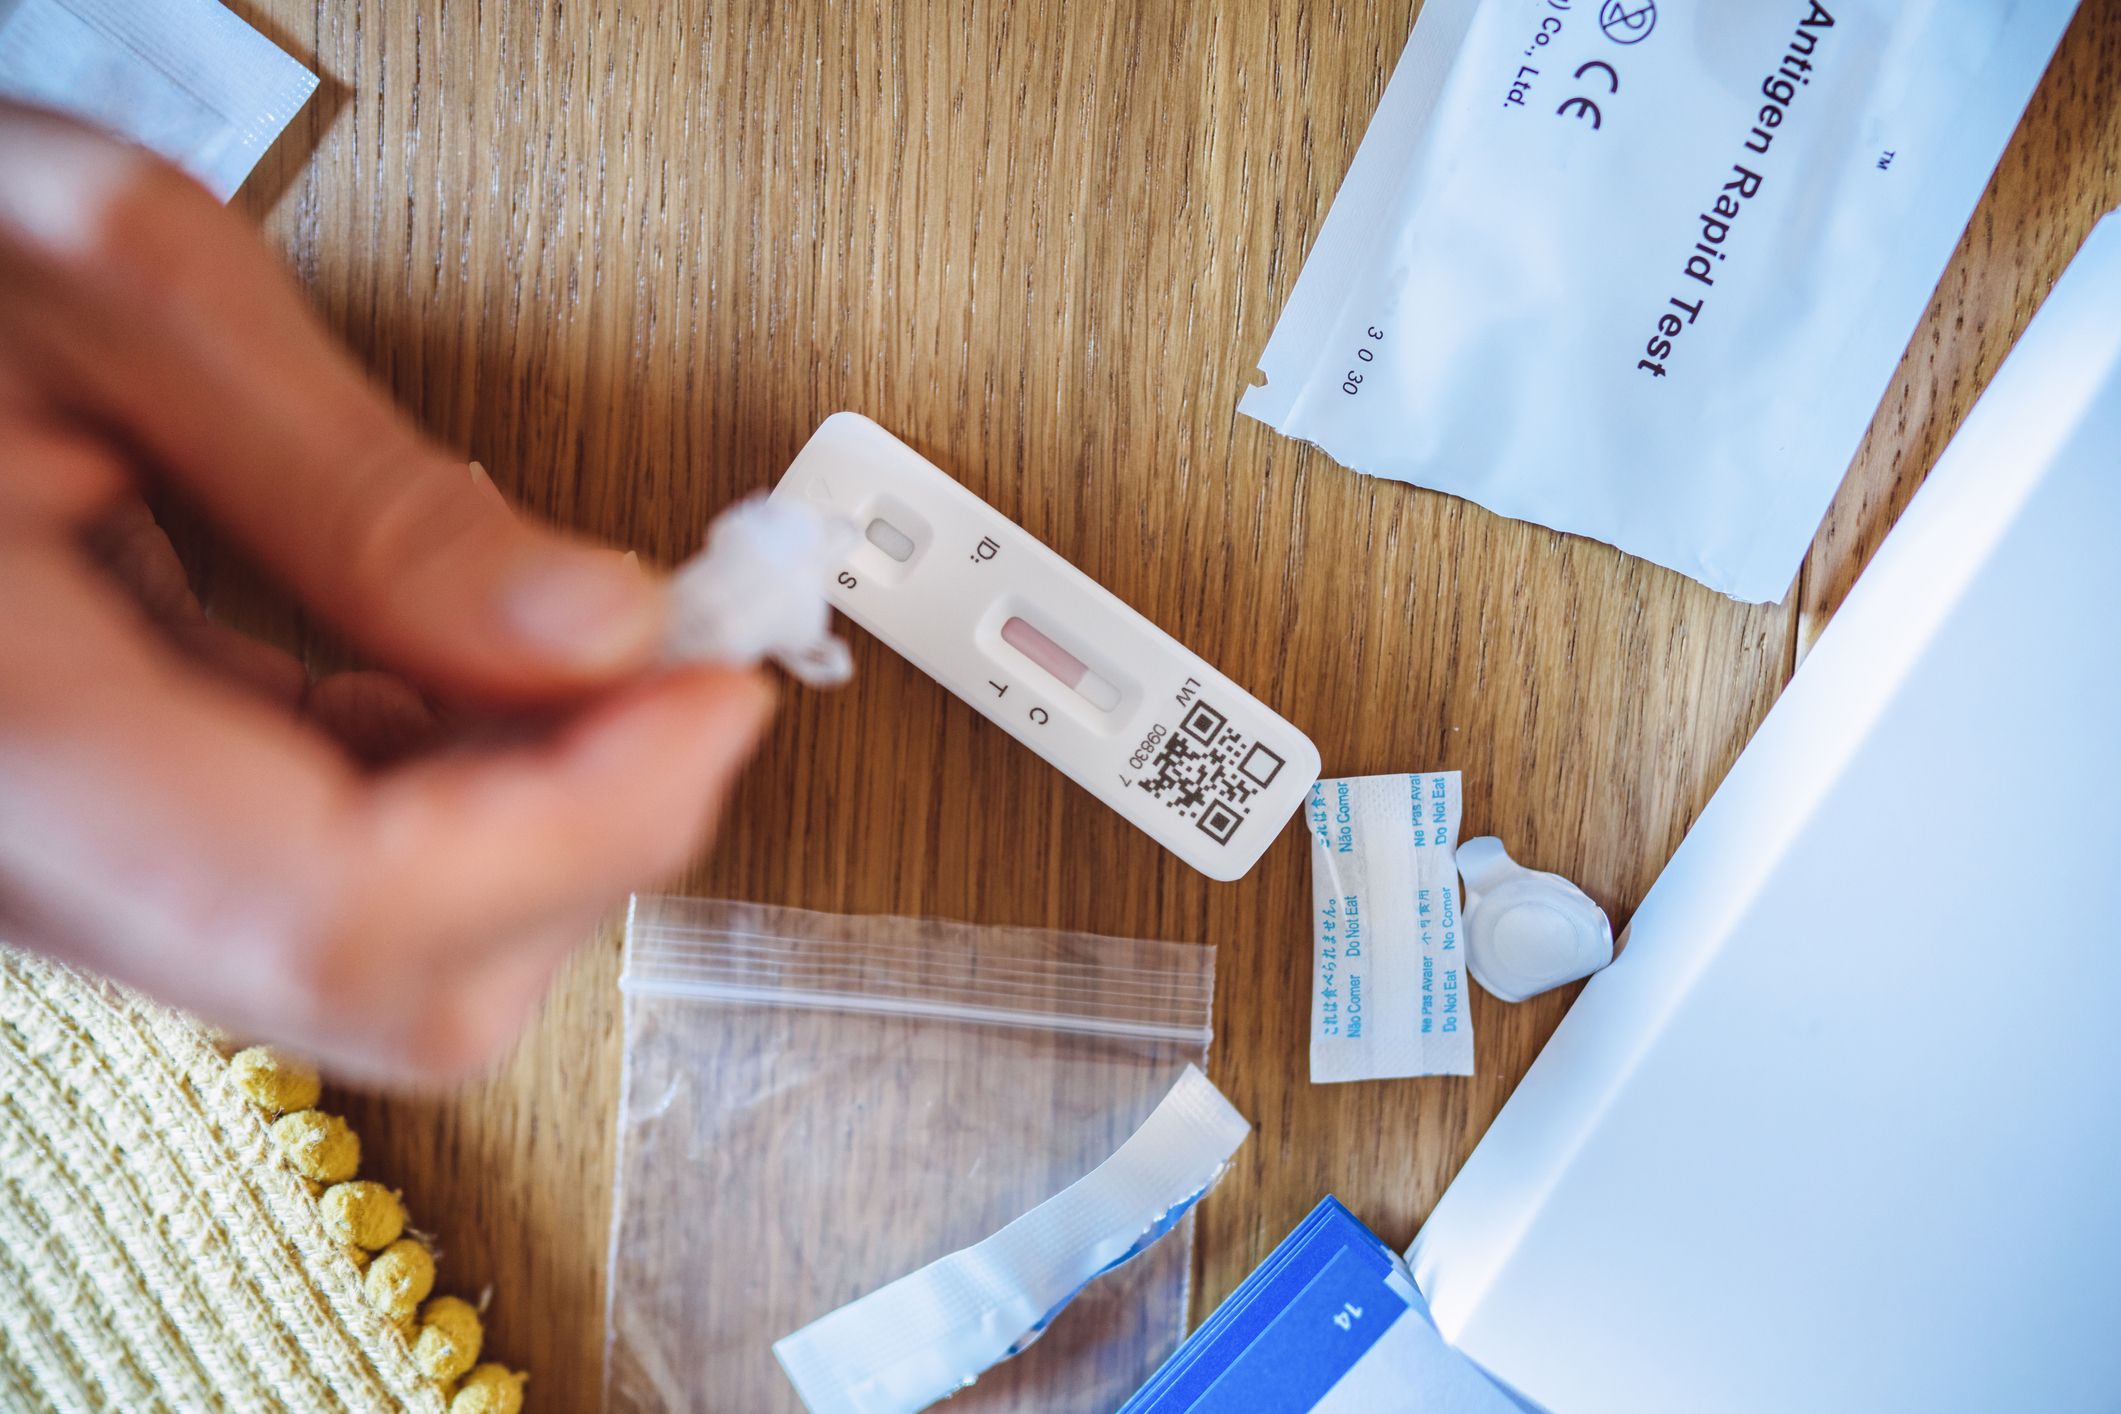 Do Expired COVID Tests Work? Read This Before You Toss Them pic